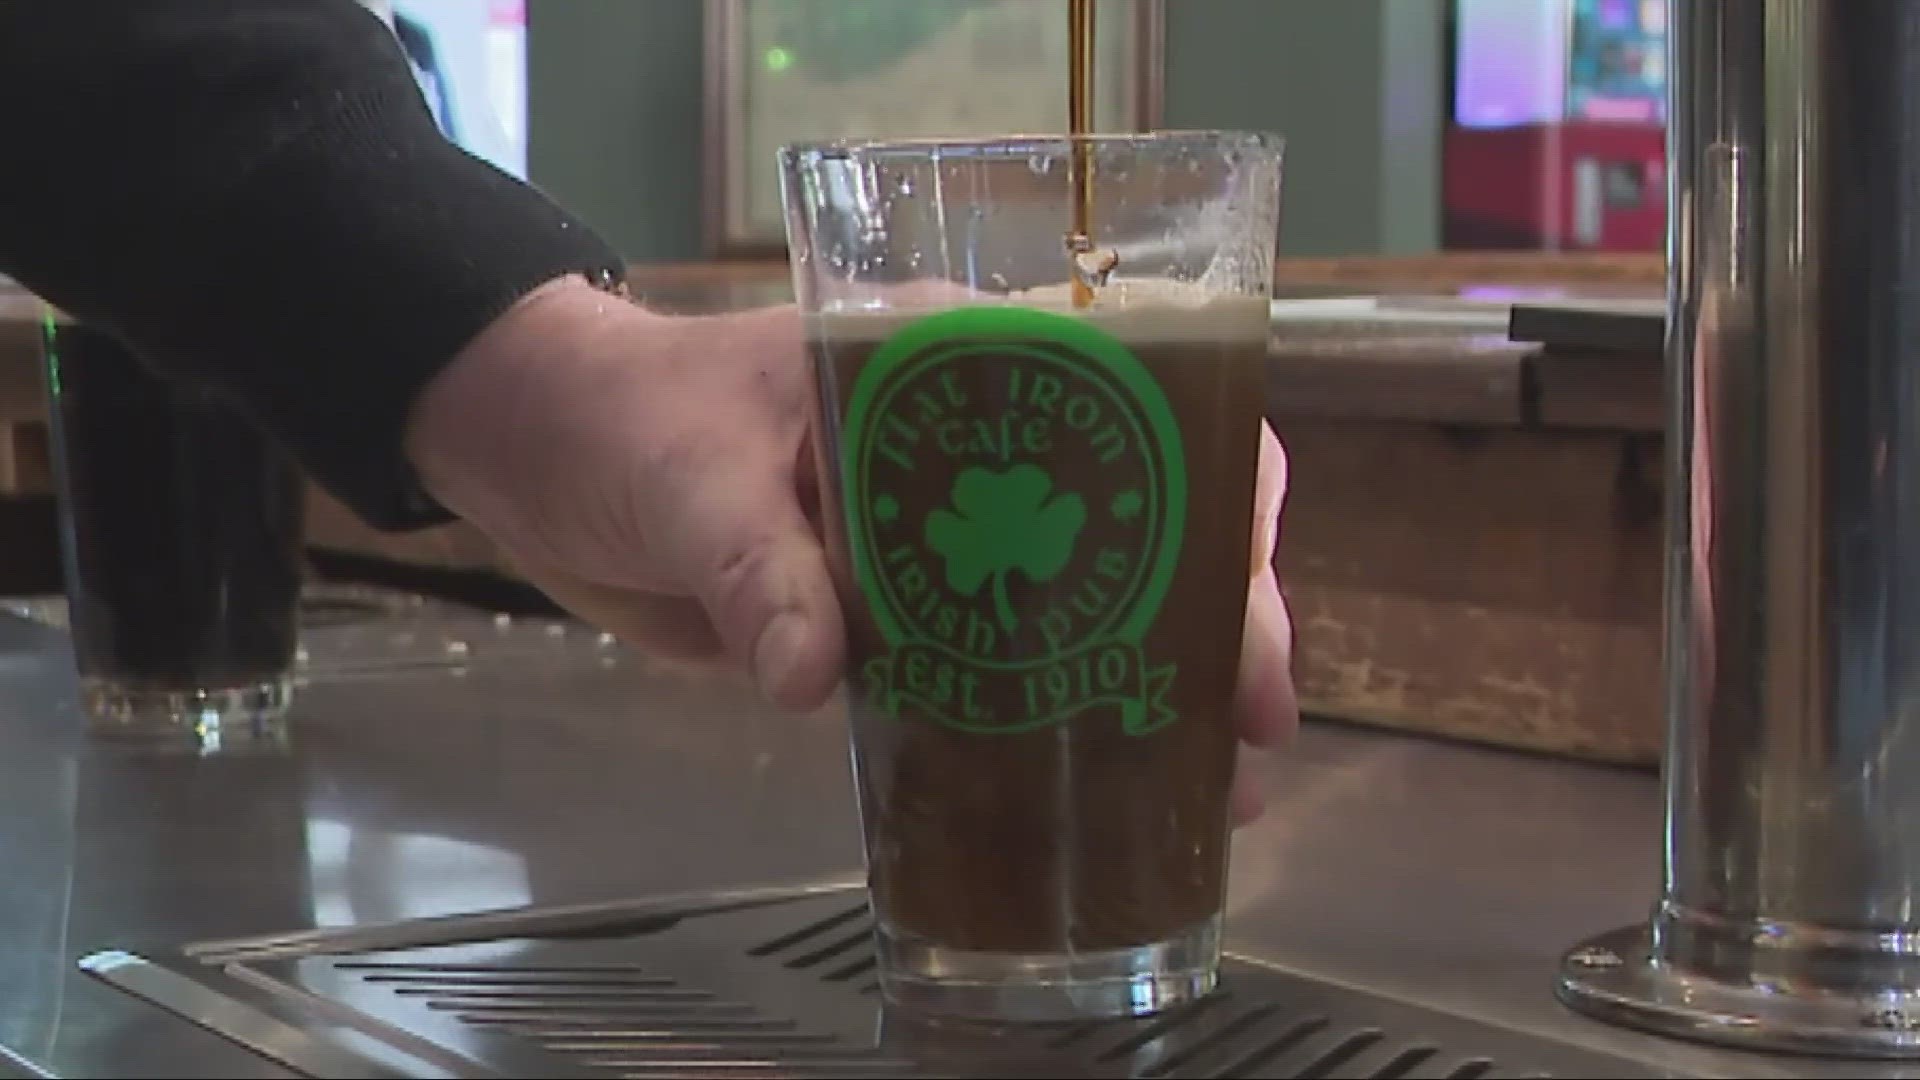 3News' Austin Love stops by the Flat Iron Cafe in Cleveland to learn the right way to pour Guinness.